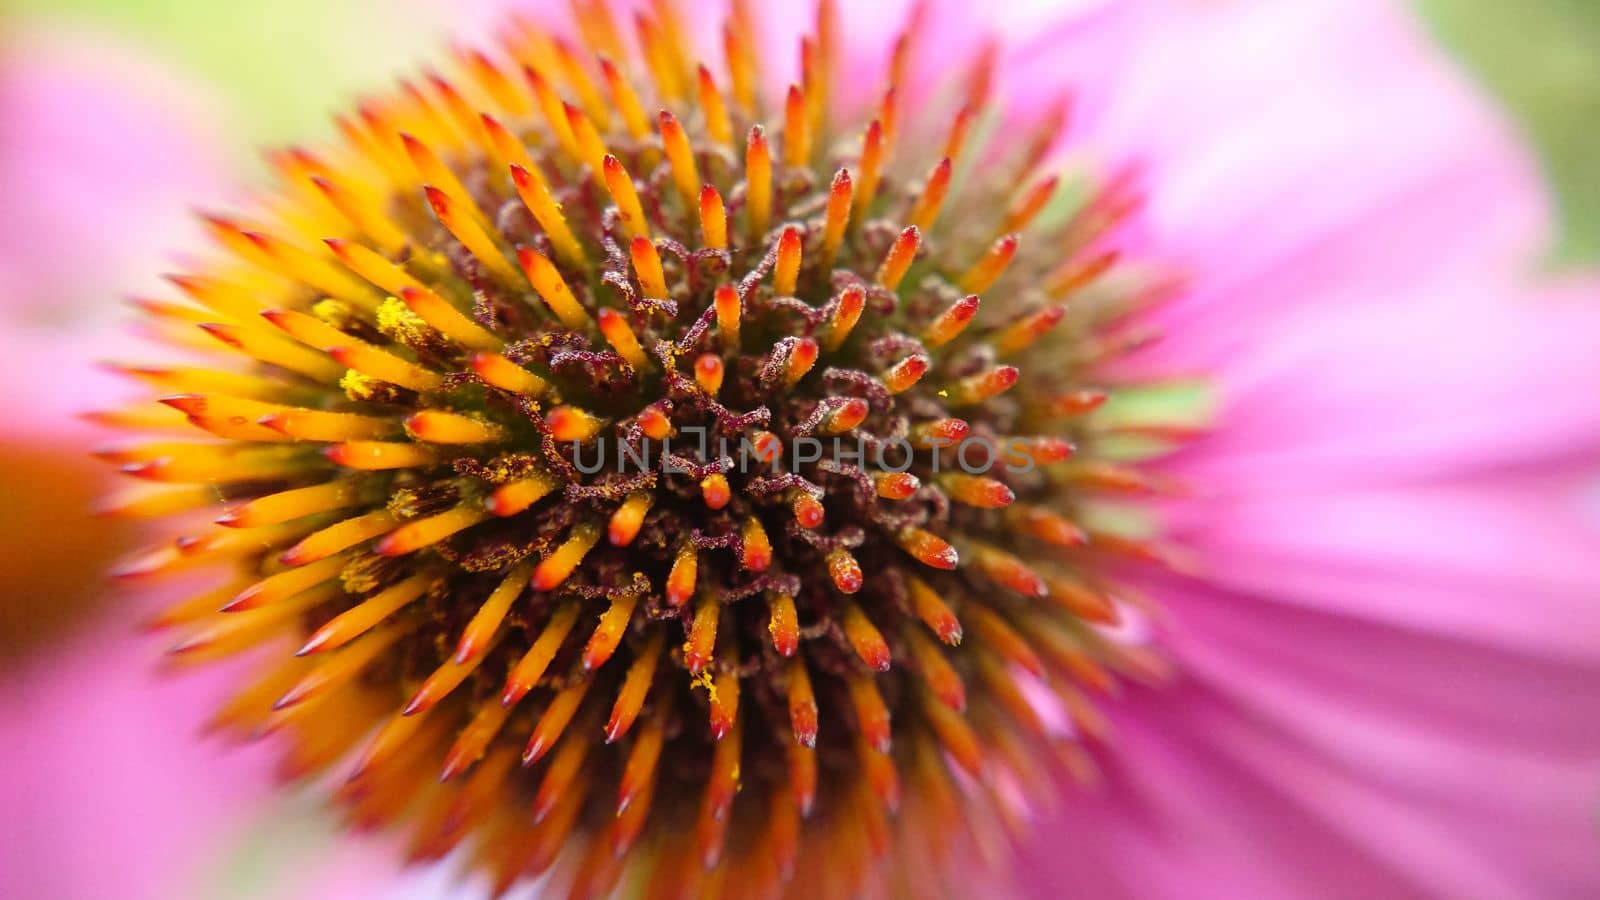 Pink Echinacea flower with a prickly head and petals back by Mastak80